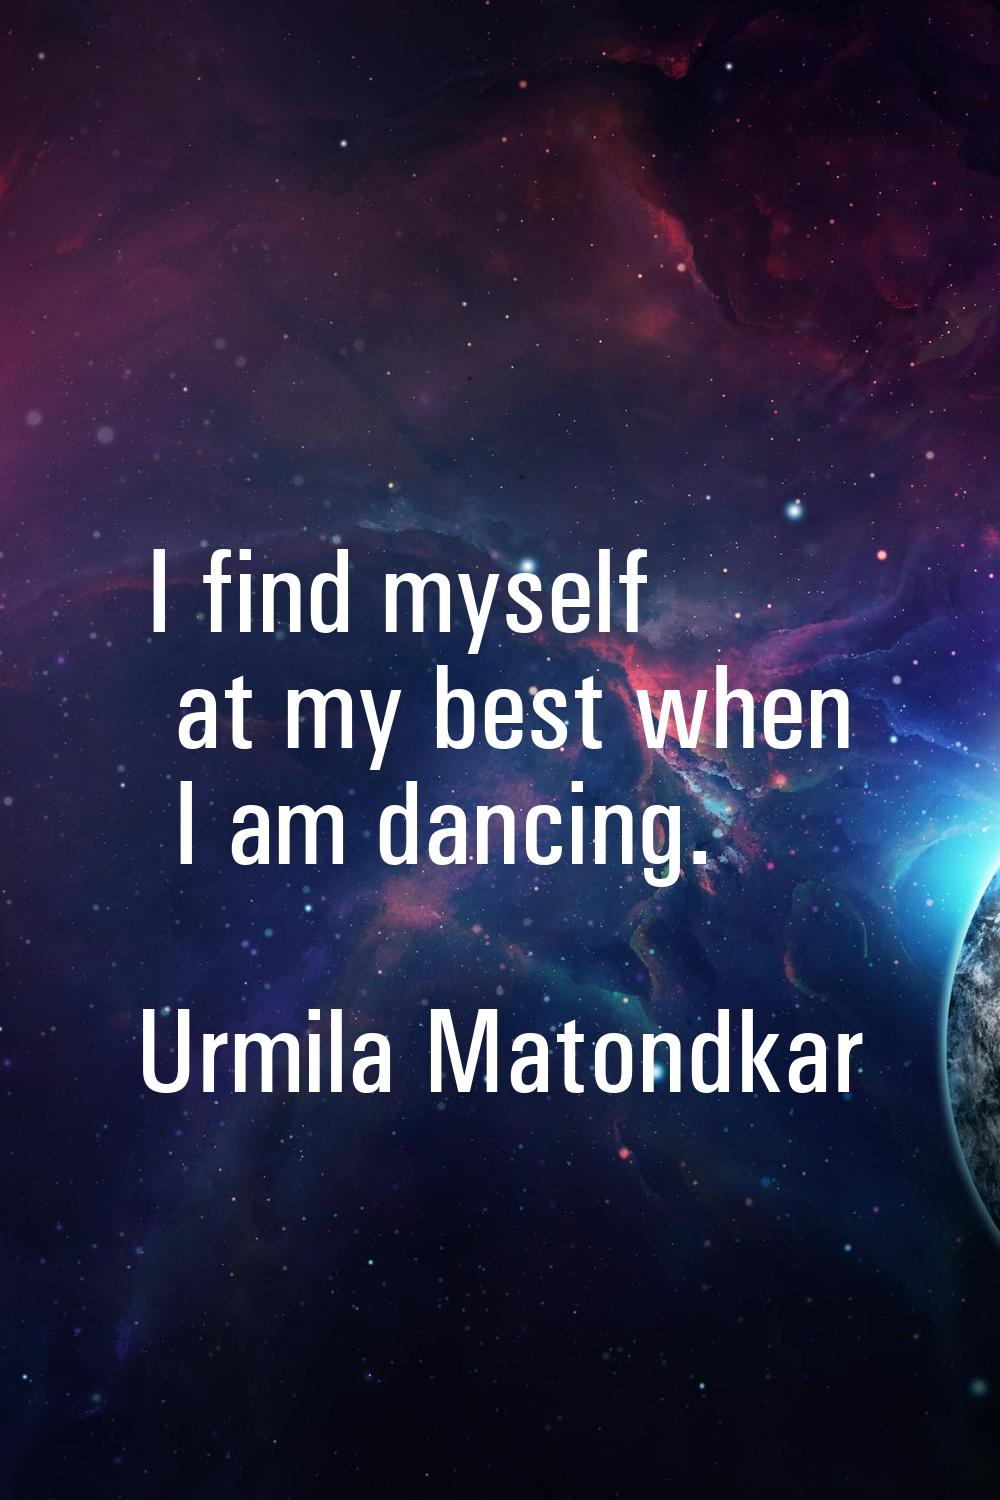 I find myself at my best when I am dancing.